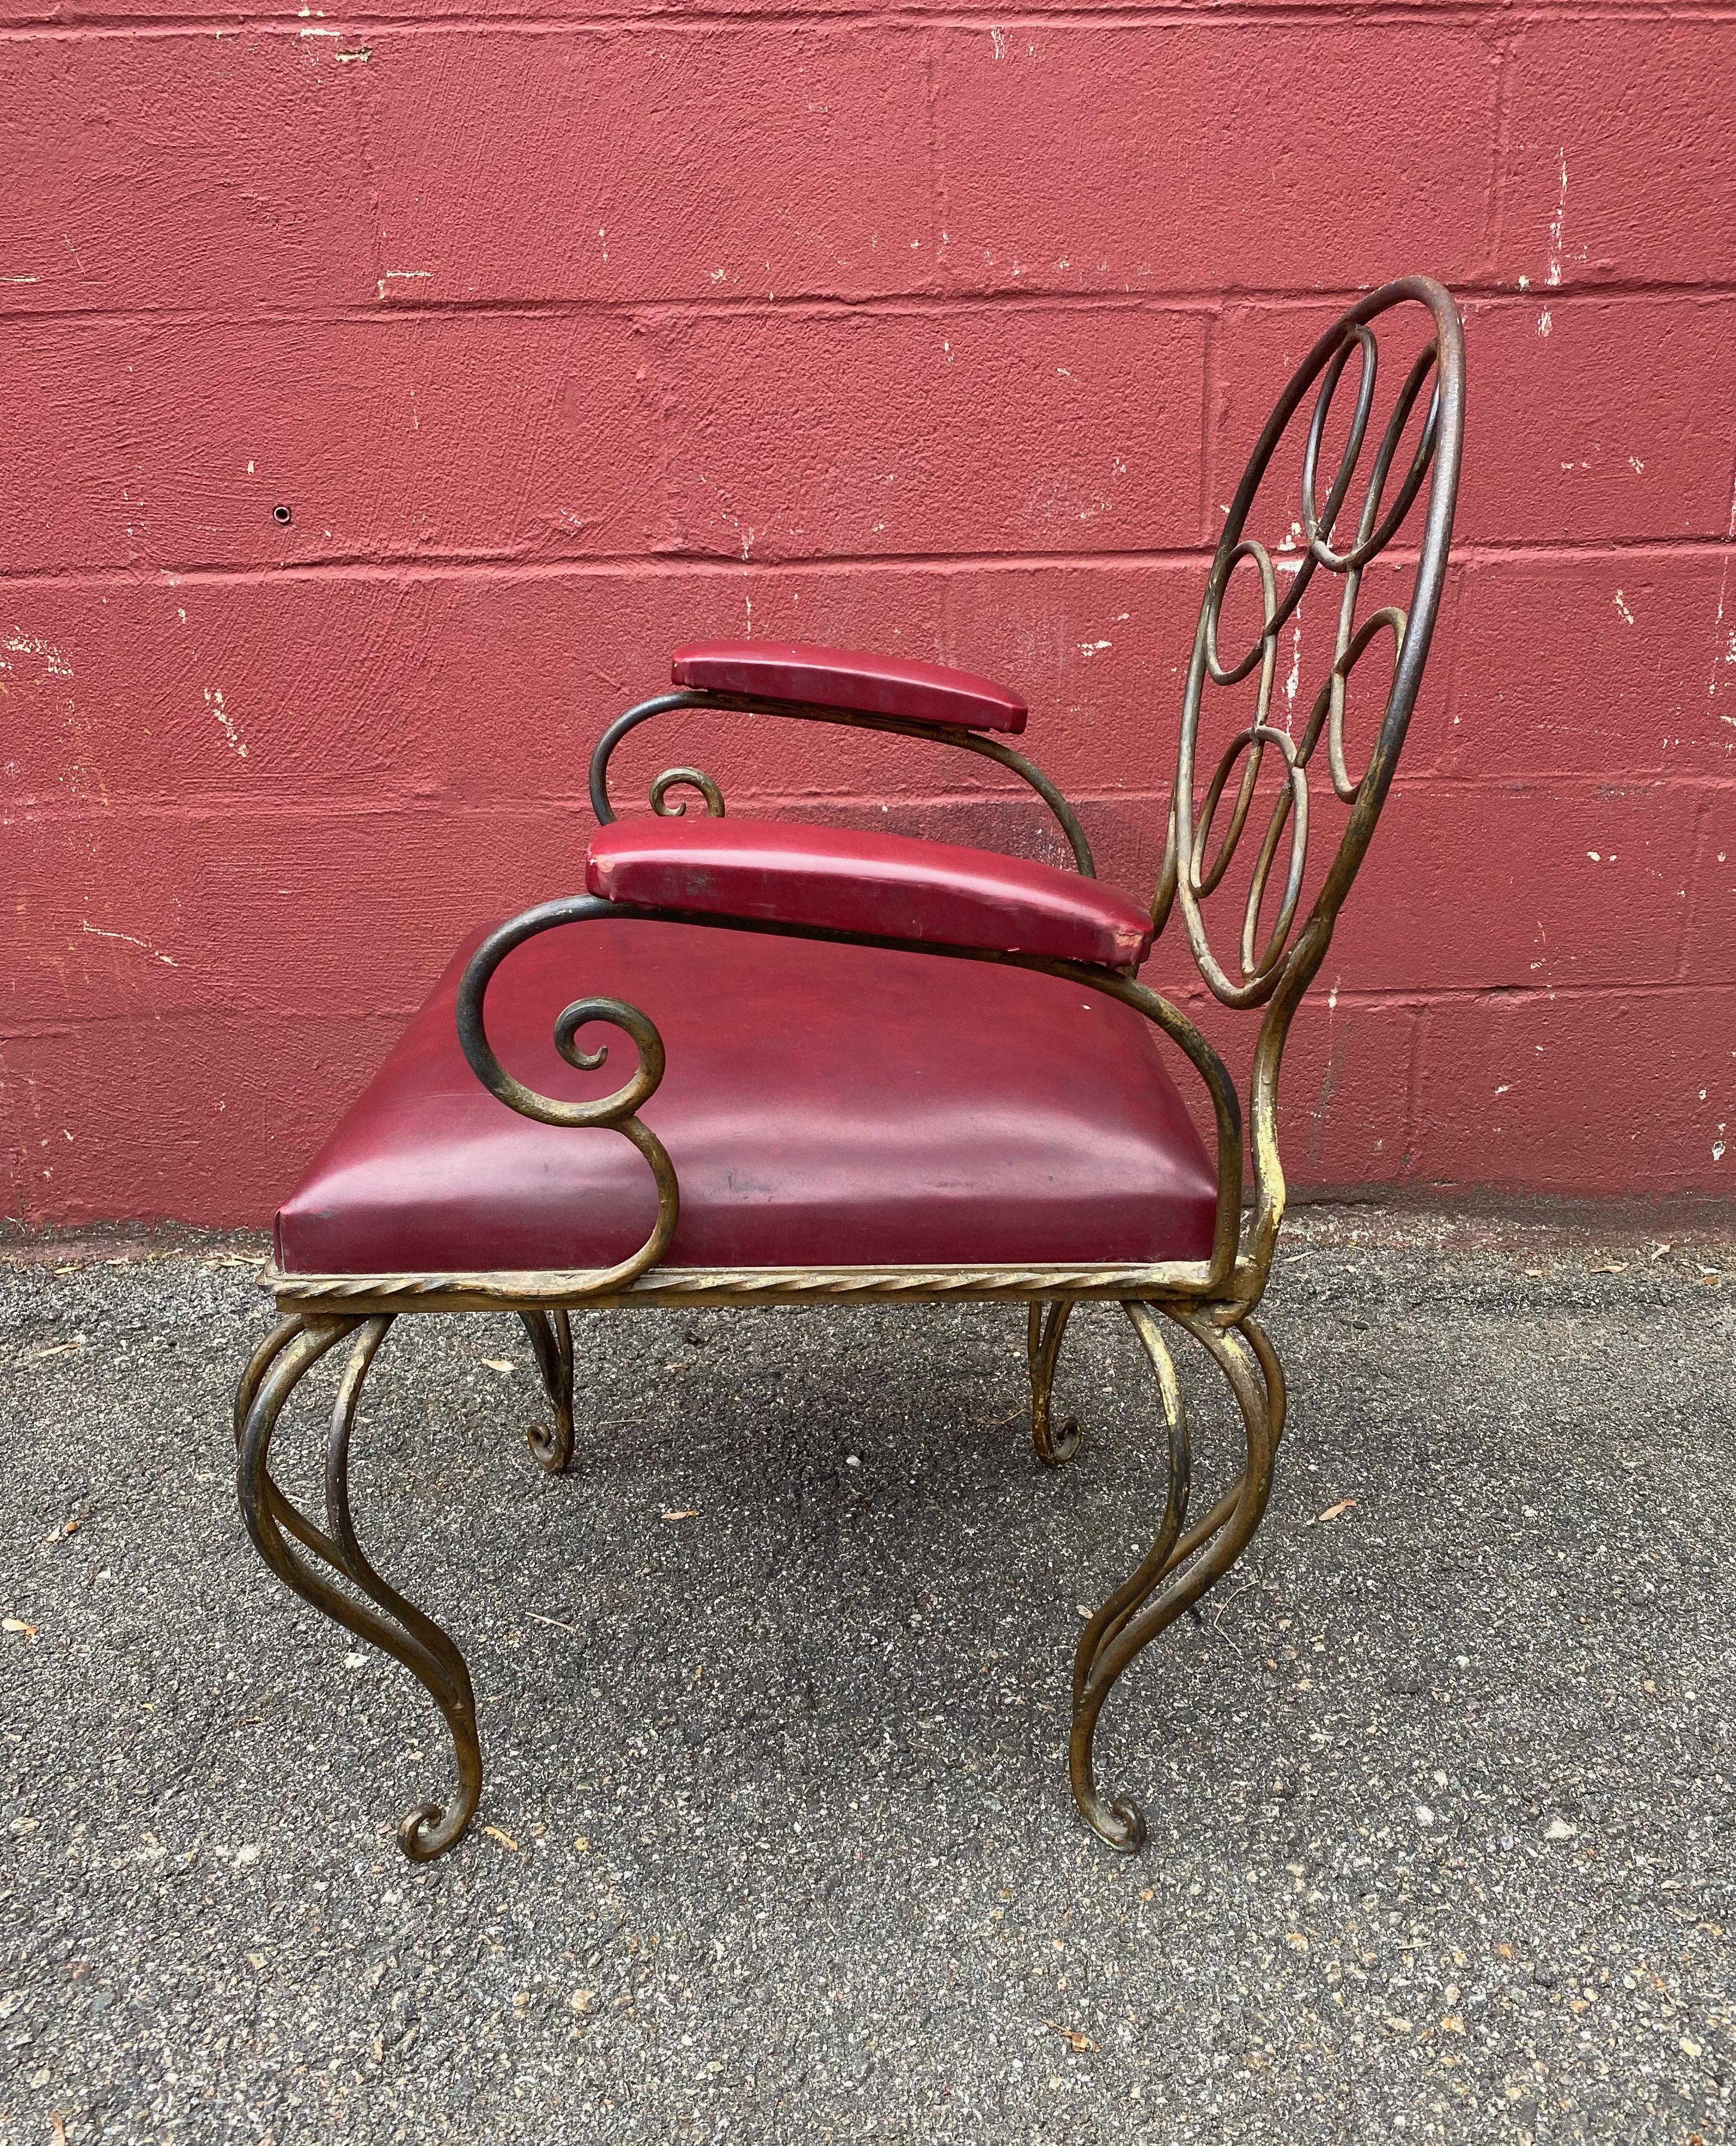 Ornate Wrought Iron Armchair in Oxblood Red Vinyl For Sale 1